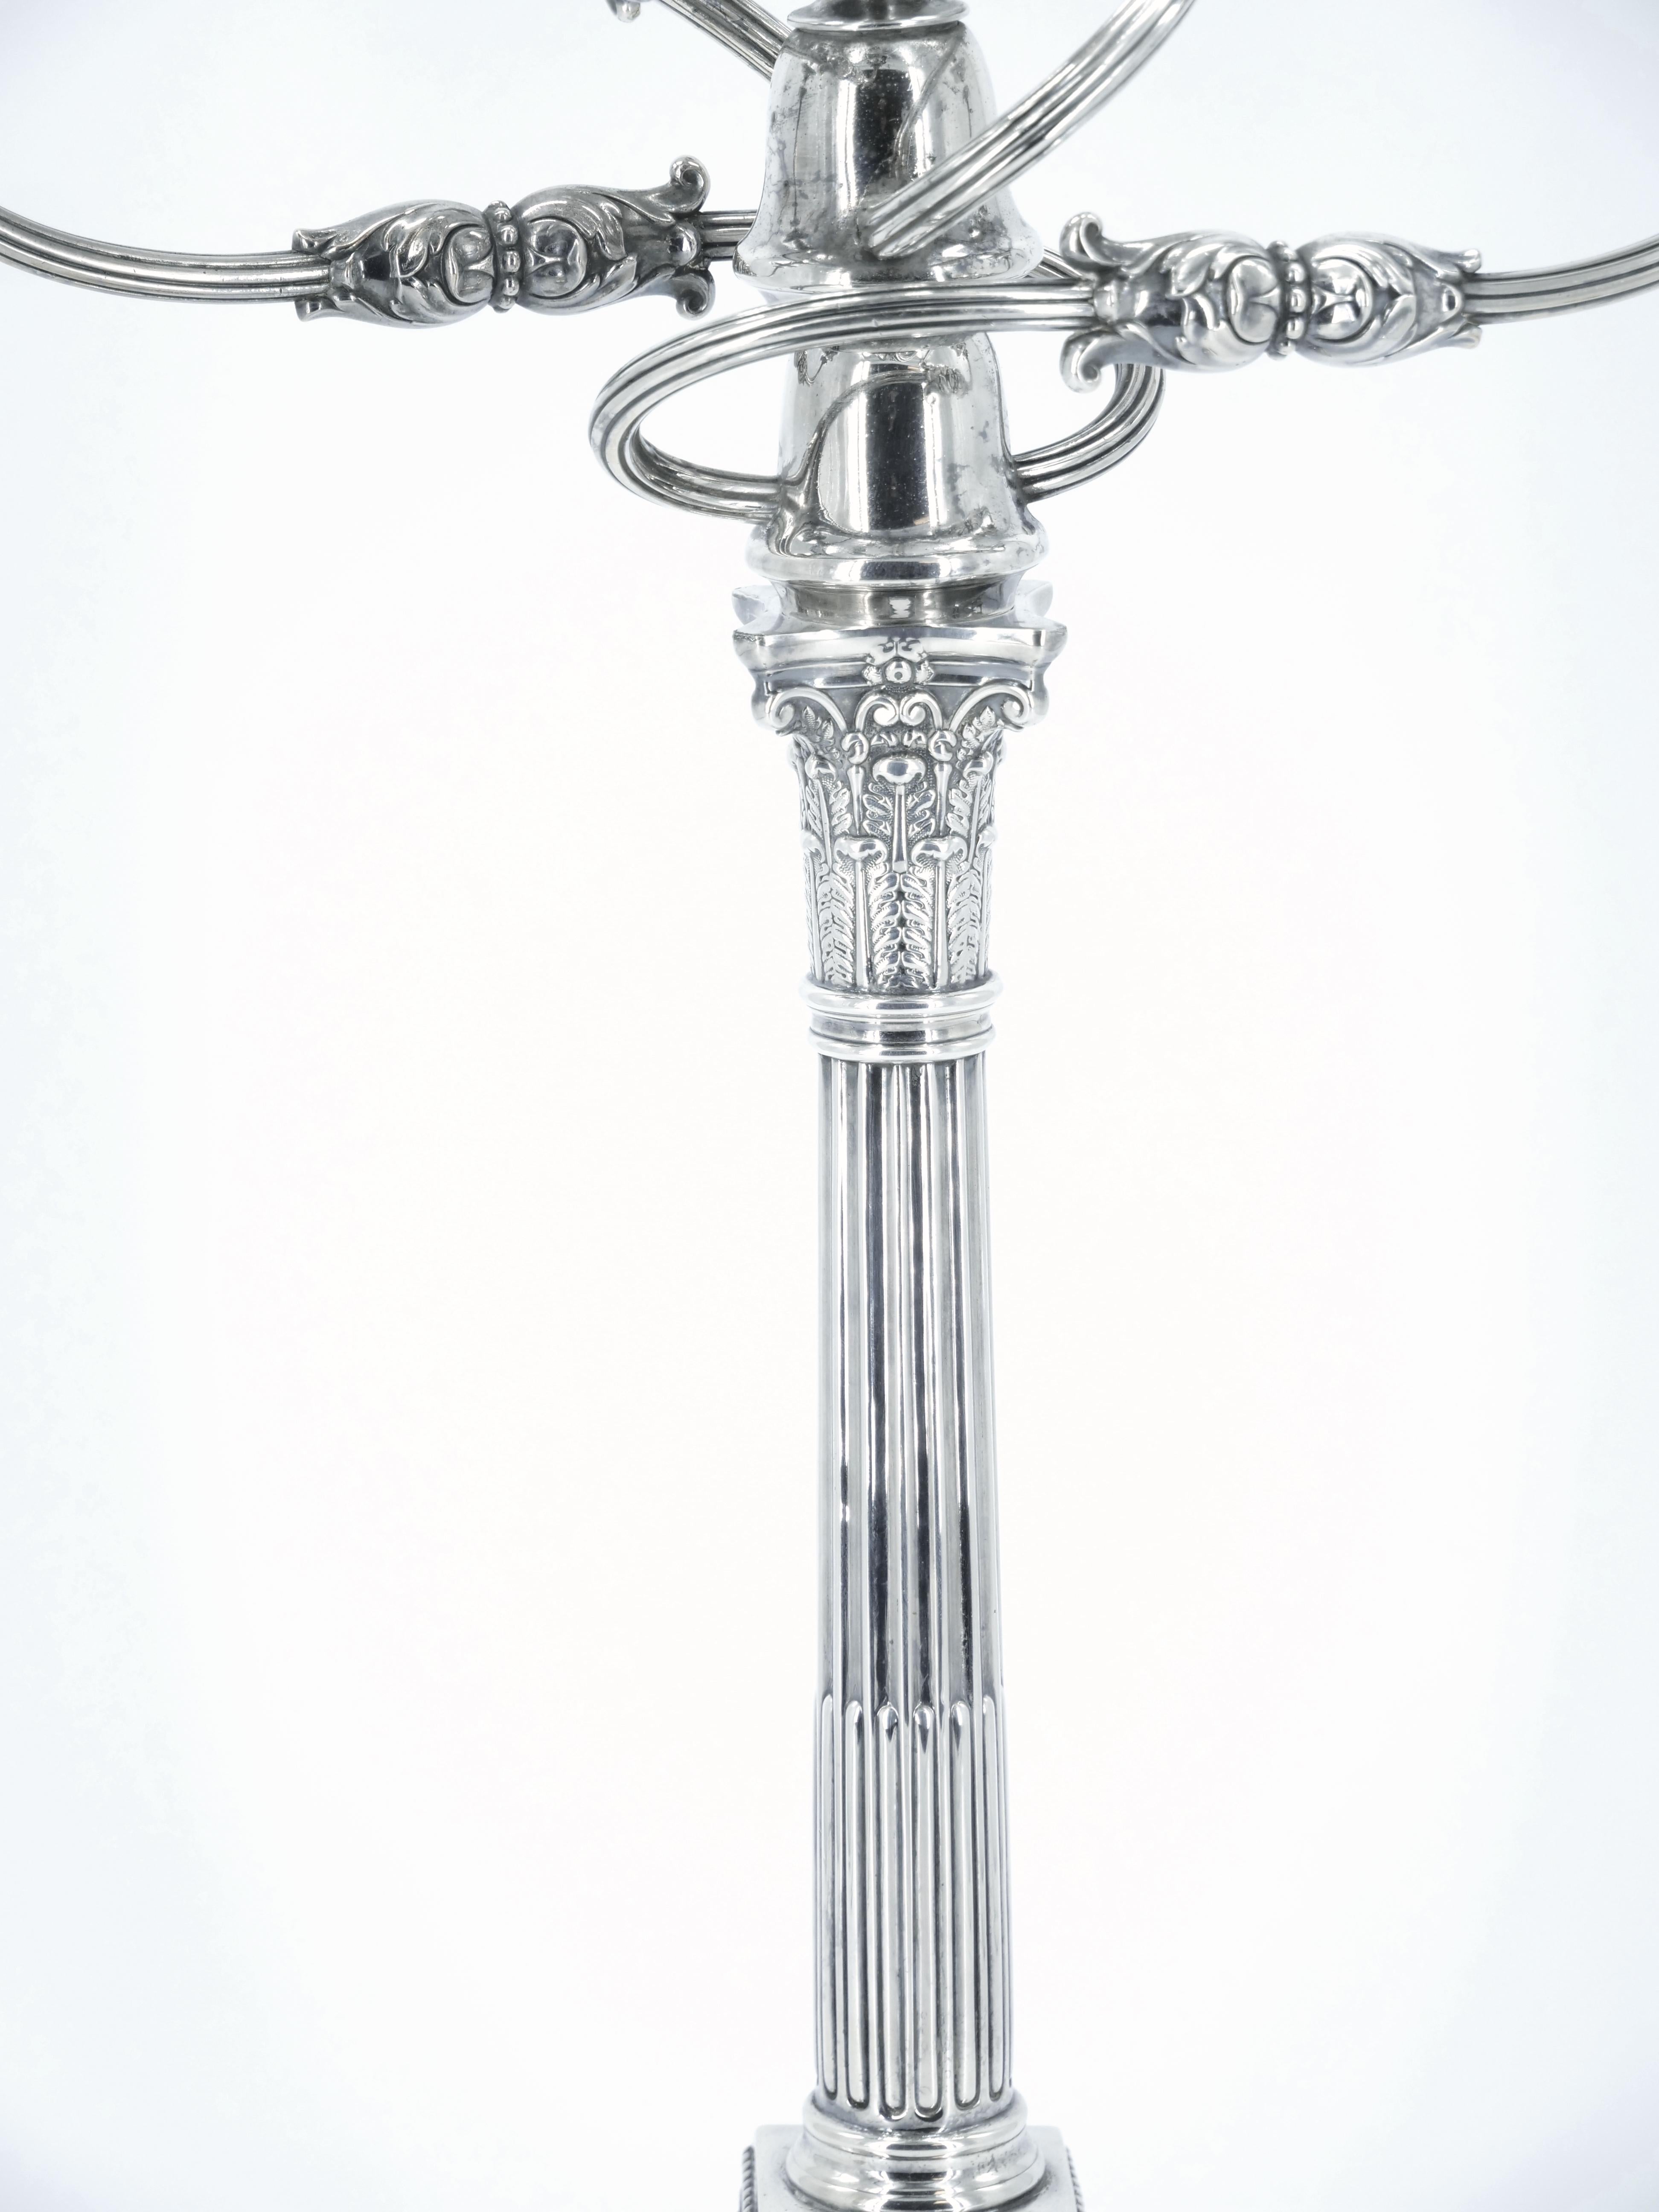 Exceptional 19th century English silverplate five-light candelabrum by James Dixon with fine repousse and chased designs with fluted columnar form standard and candle holders supported with Corinthian style capitals. Converts to a three-light